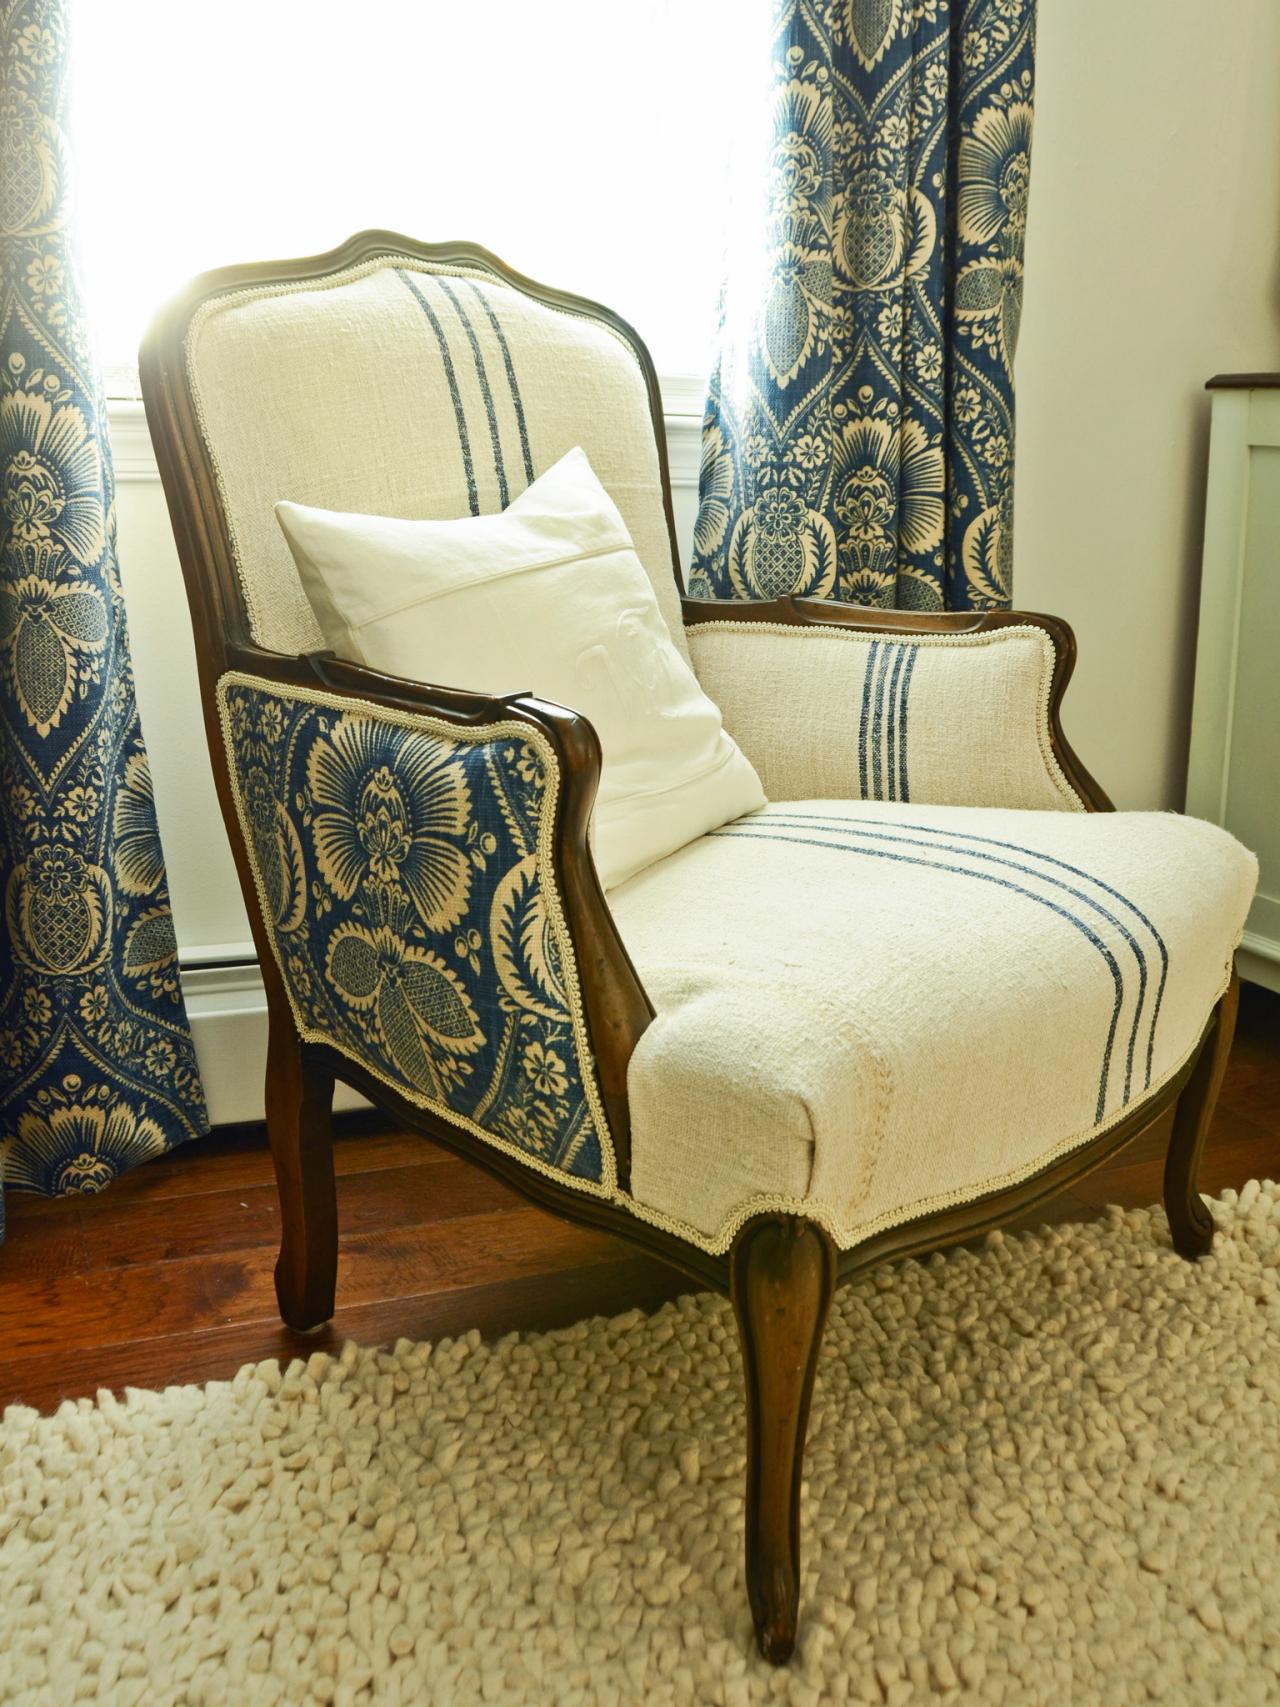 How To Reupholster An Arm Chair Hgtv